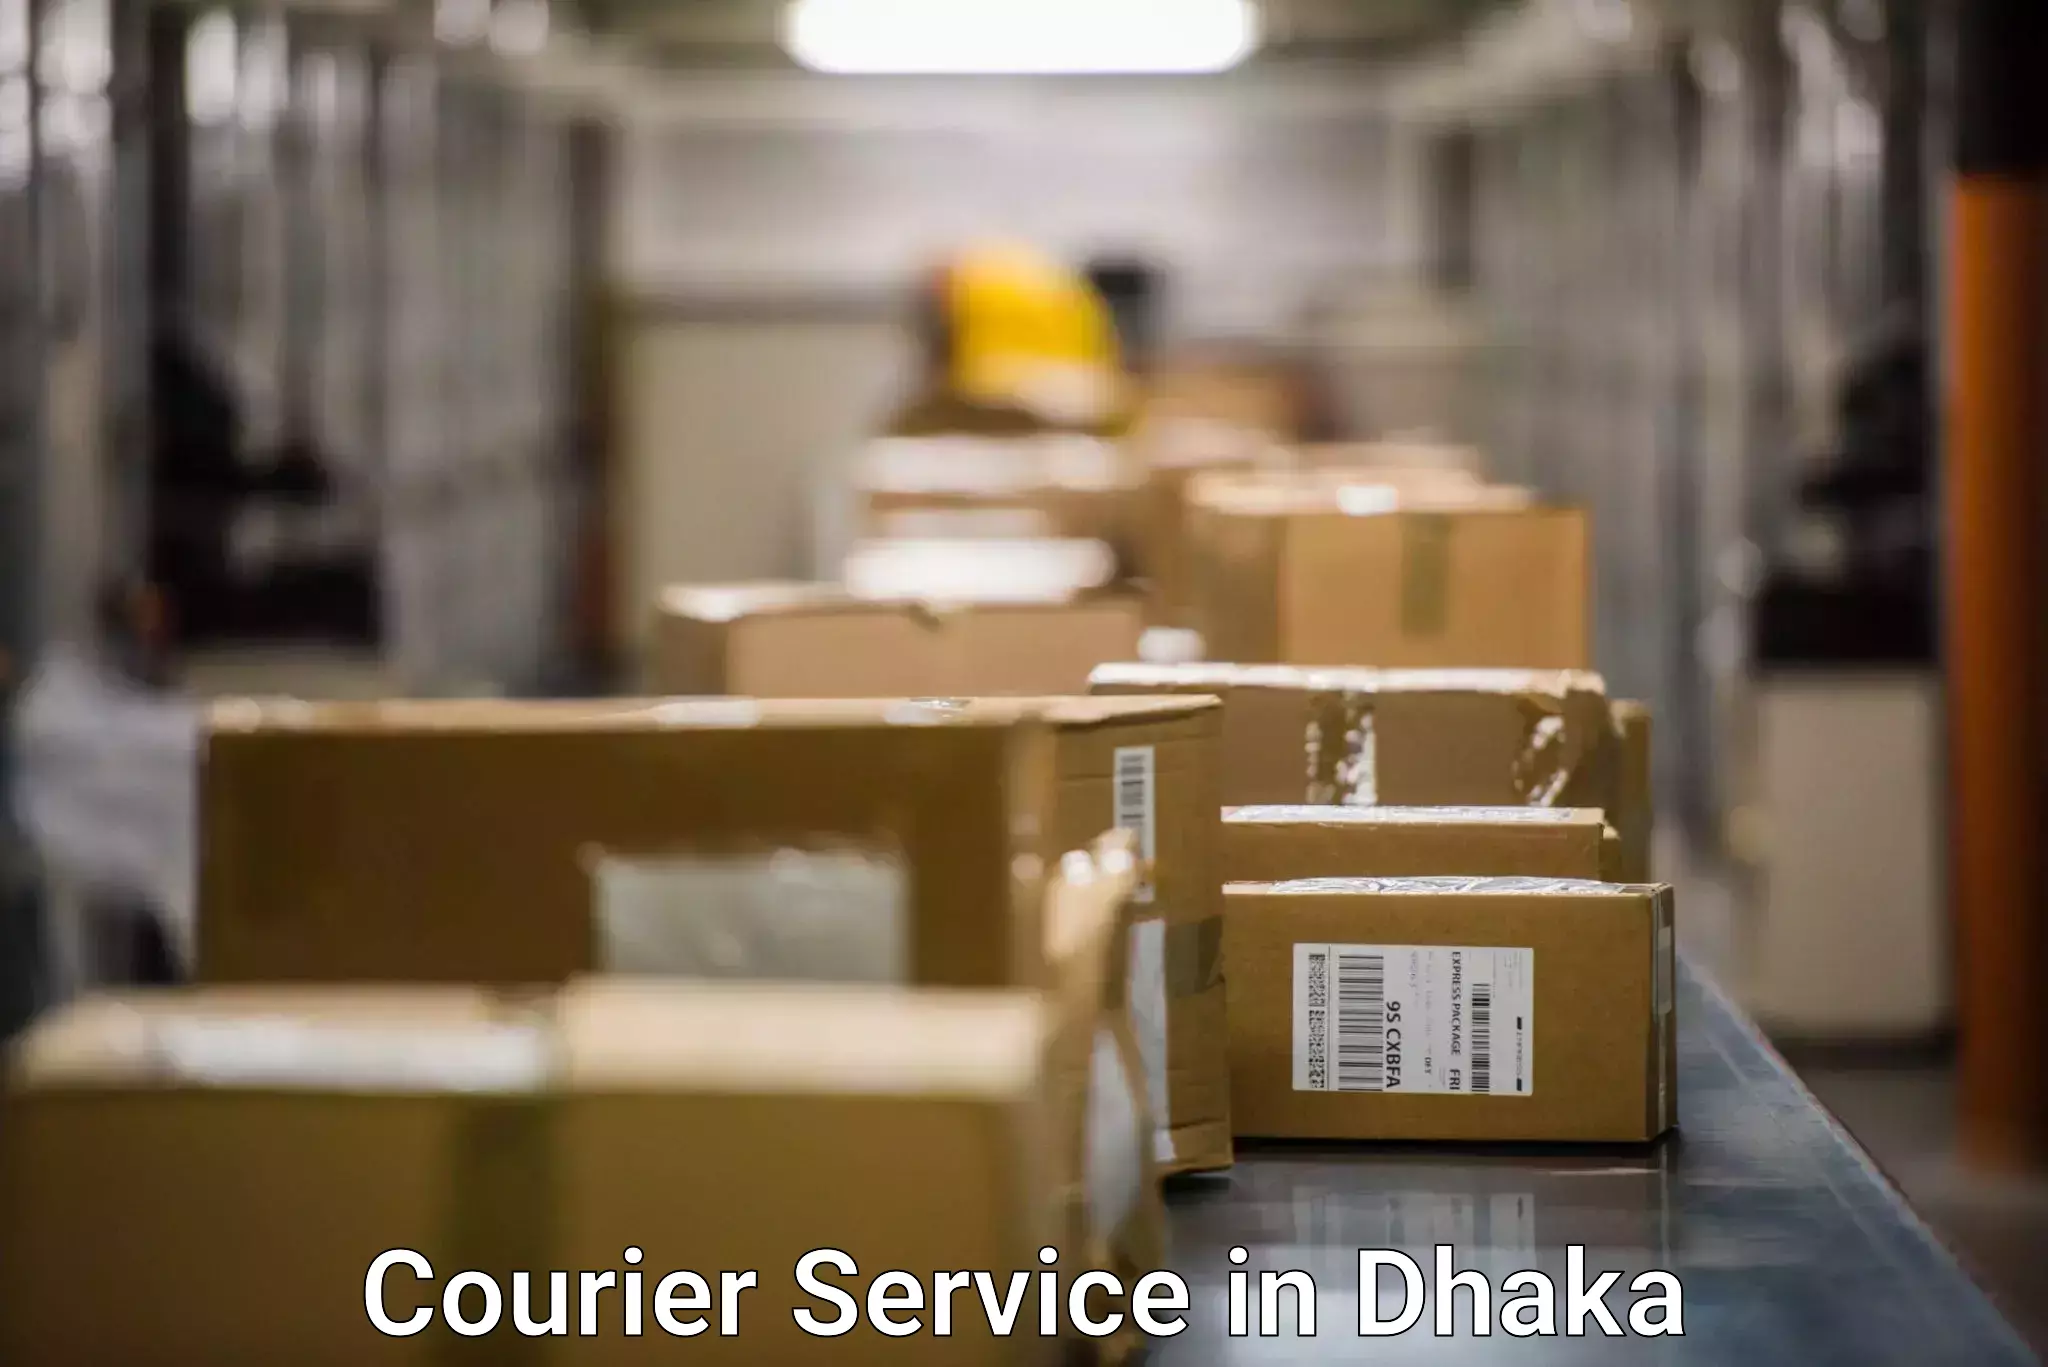 Tailored delivery services in Dhaka